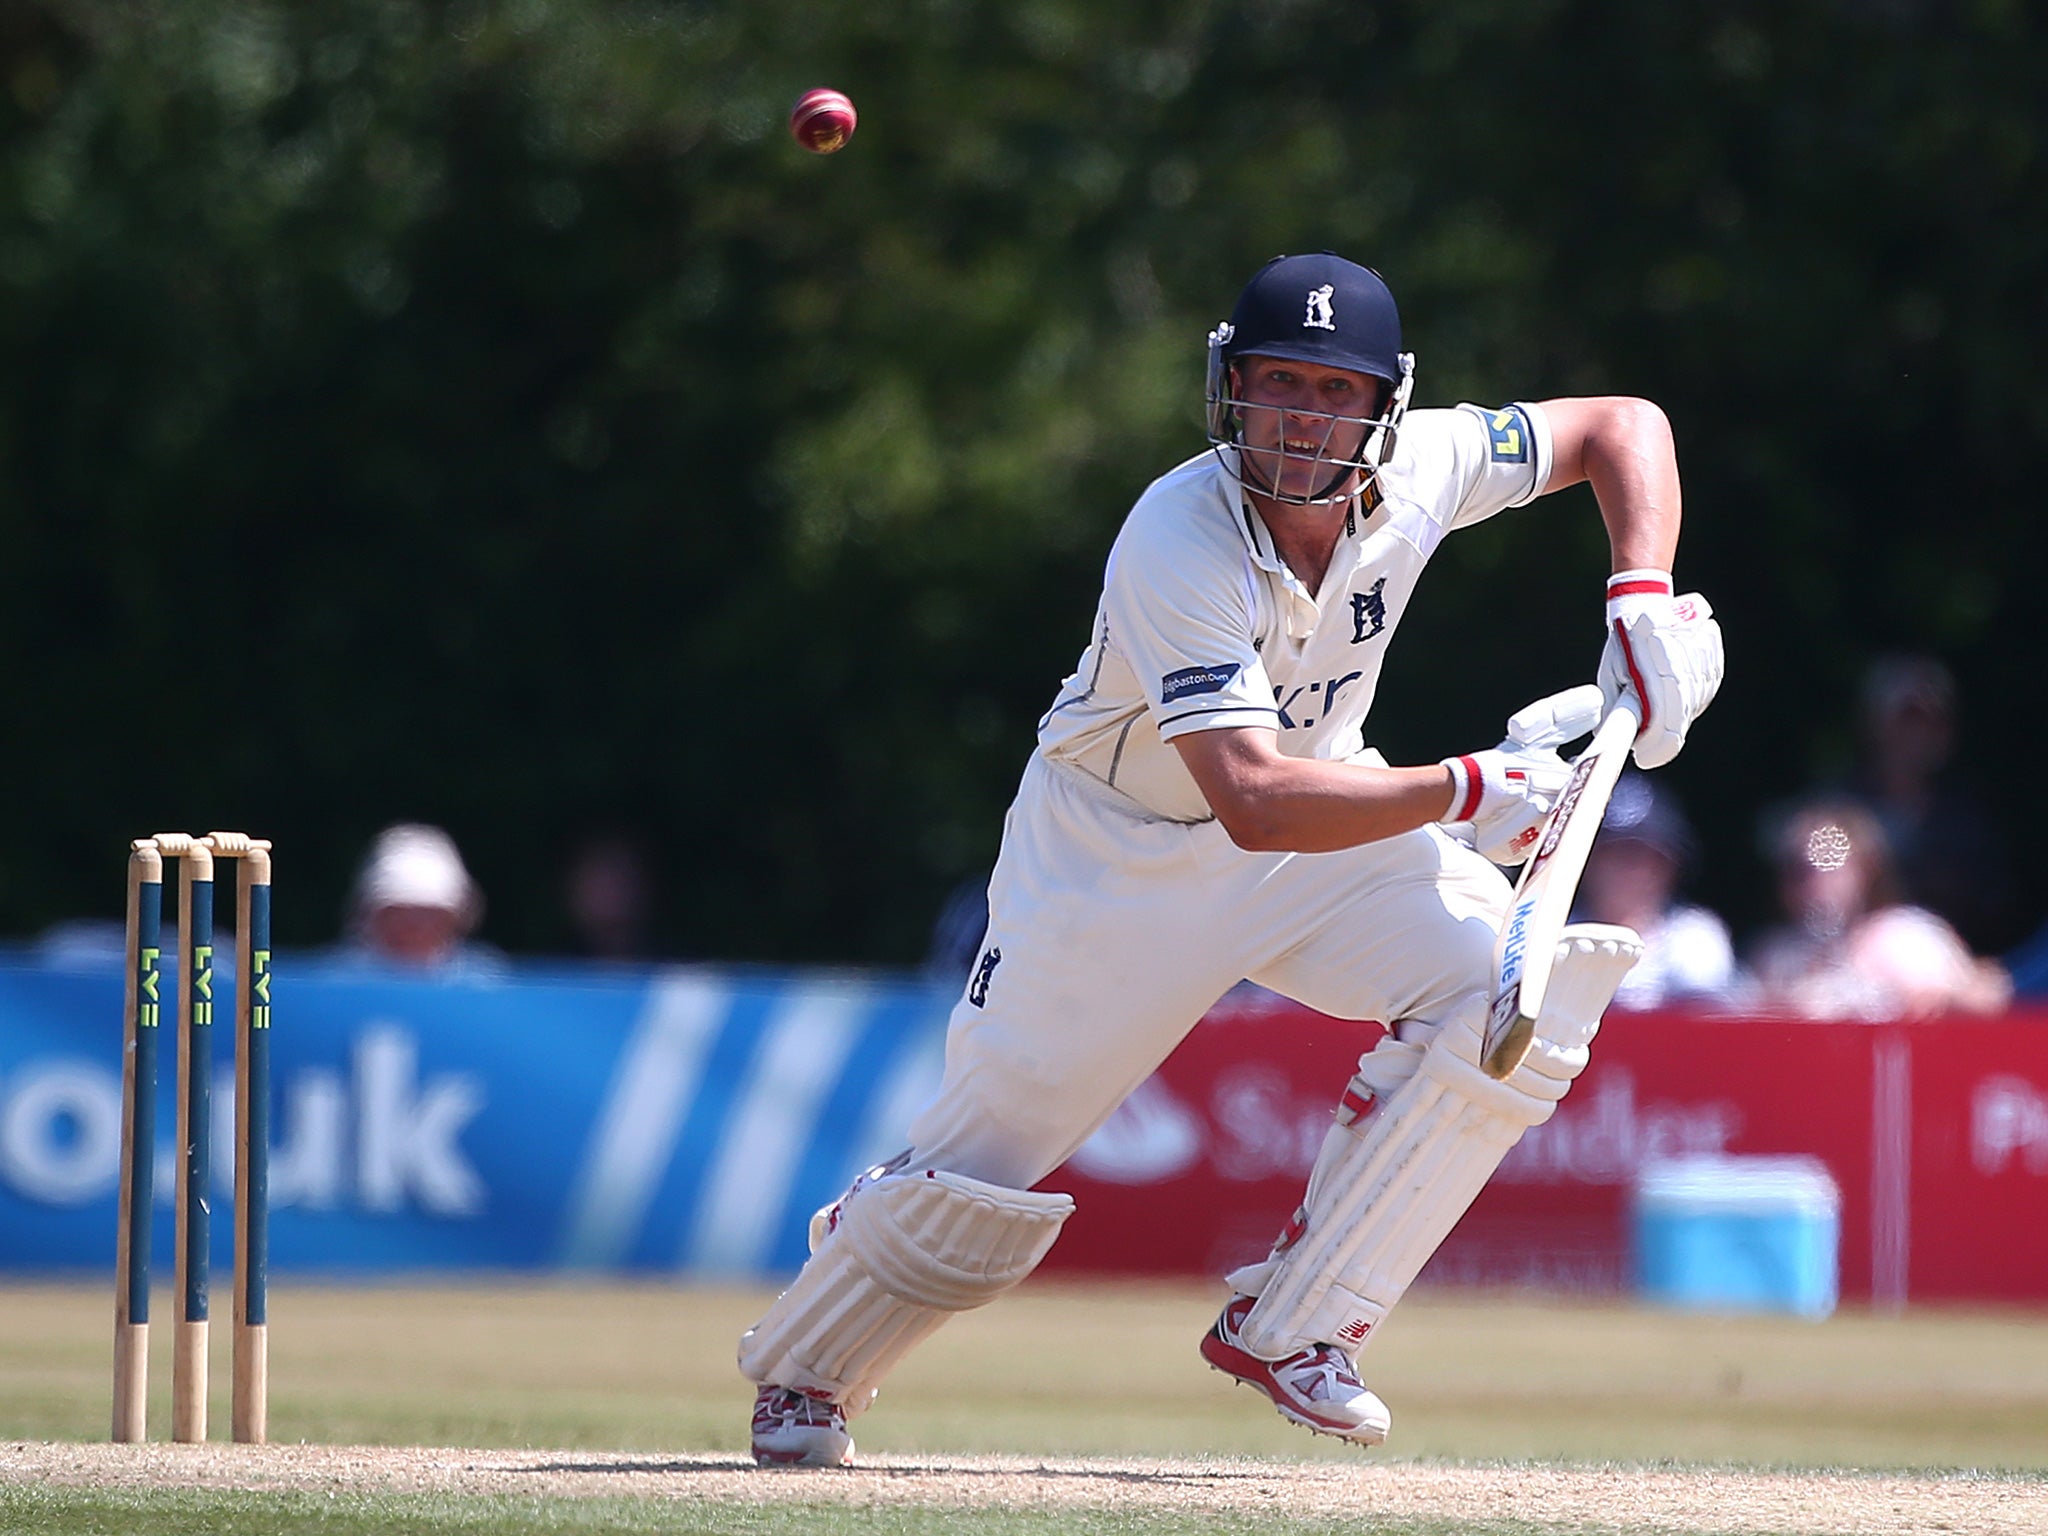 Jonathan Trott is set to be recalled for the West Indies tour after doing well